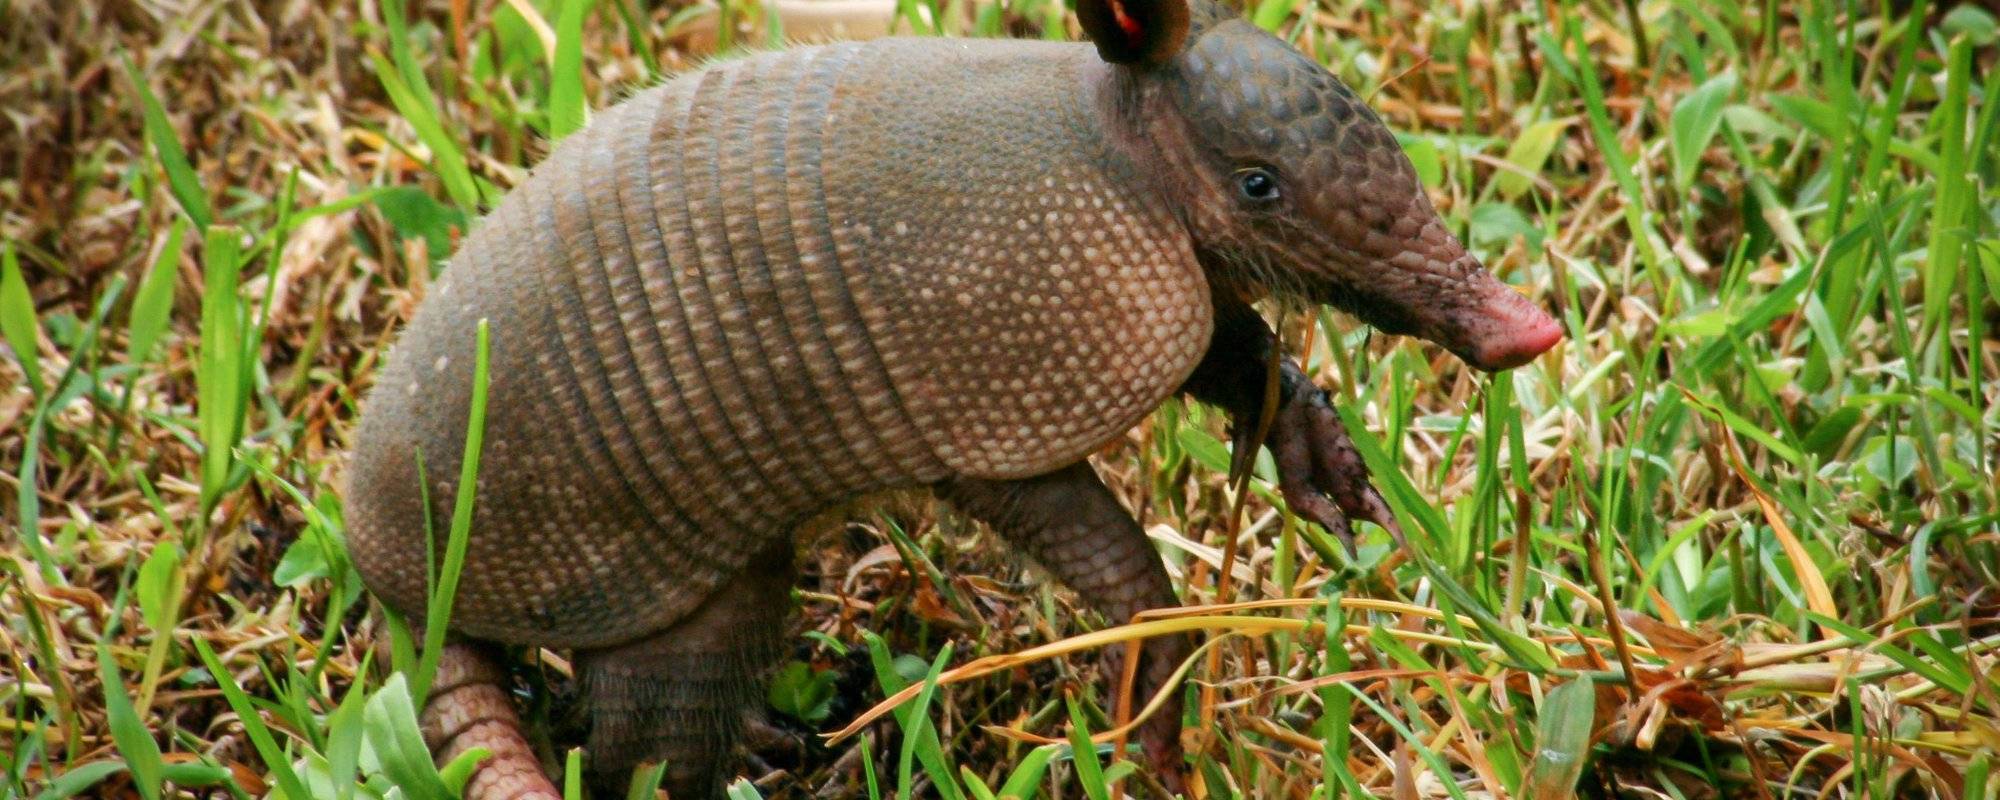 Armadillo baby, living an experience as a nature photographer